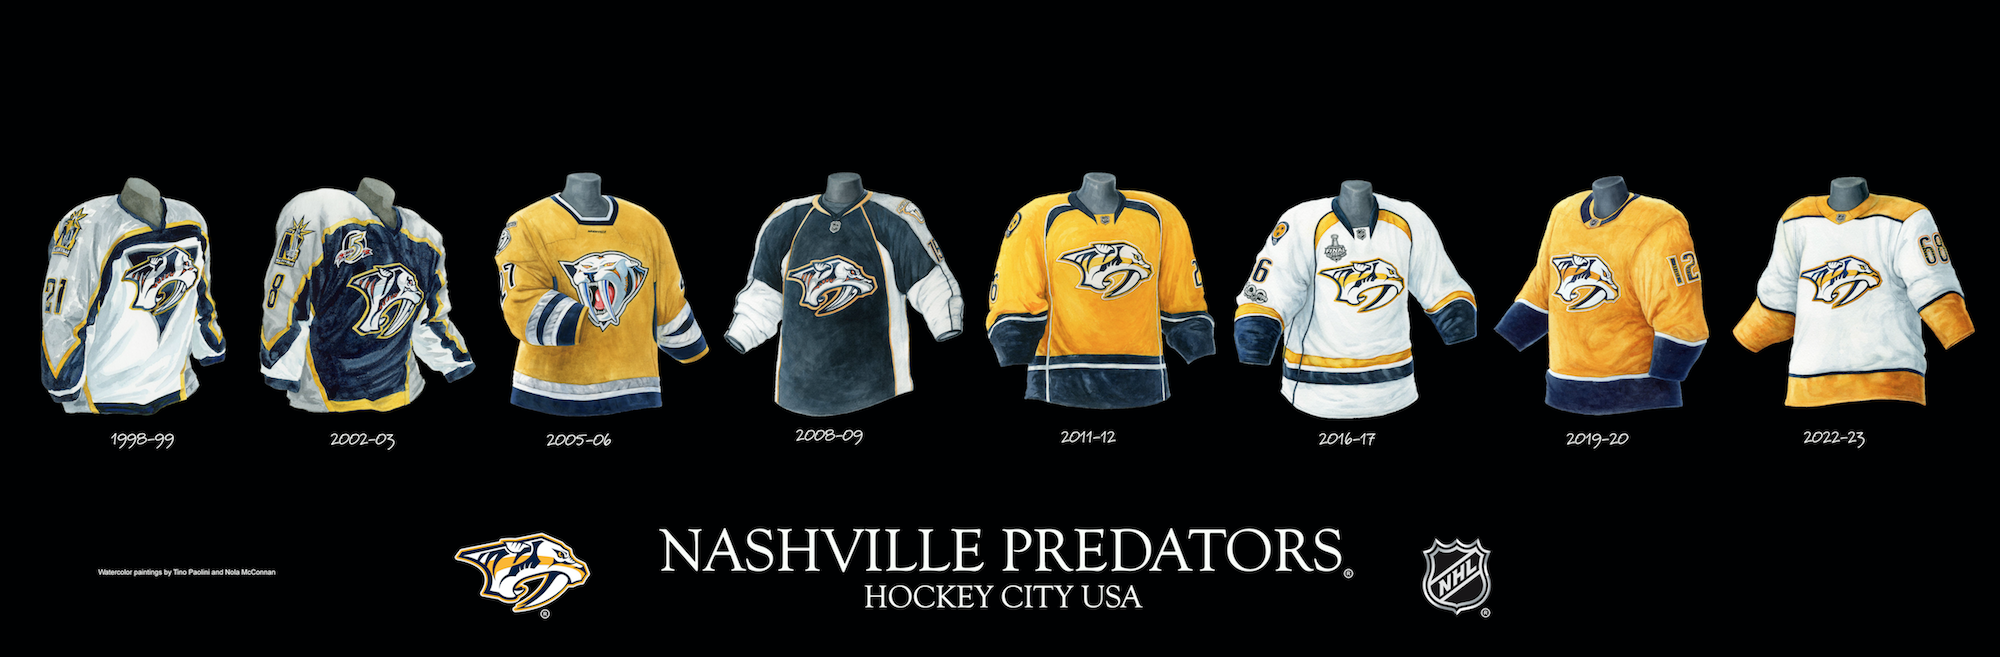 Heritage Uniforms and Jerseys and Stadiums - NFL, MLB, NHL, NBA, NCAA, US  Colleges: Pittsburgh Penguins - Franchise, Team, Arena and Uniform History